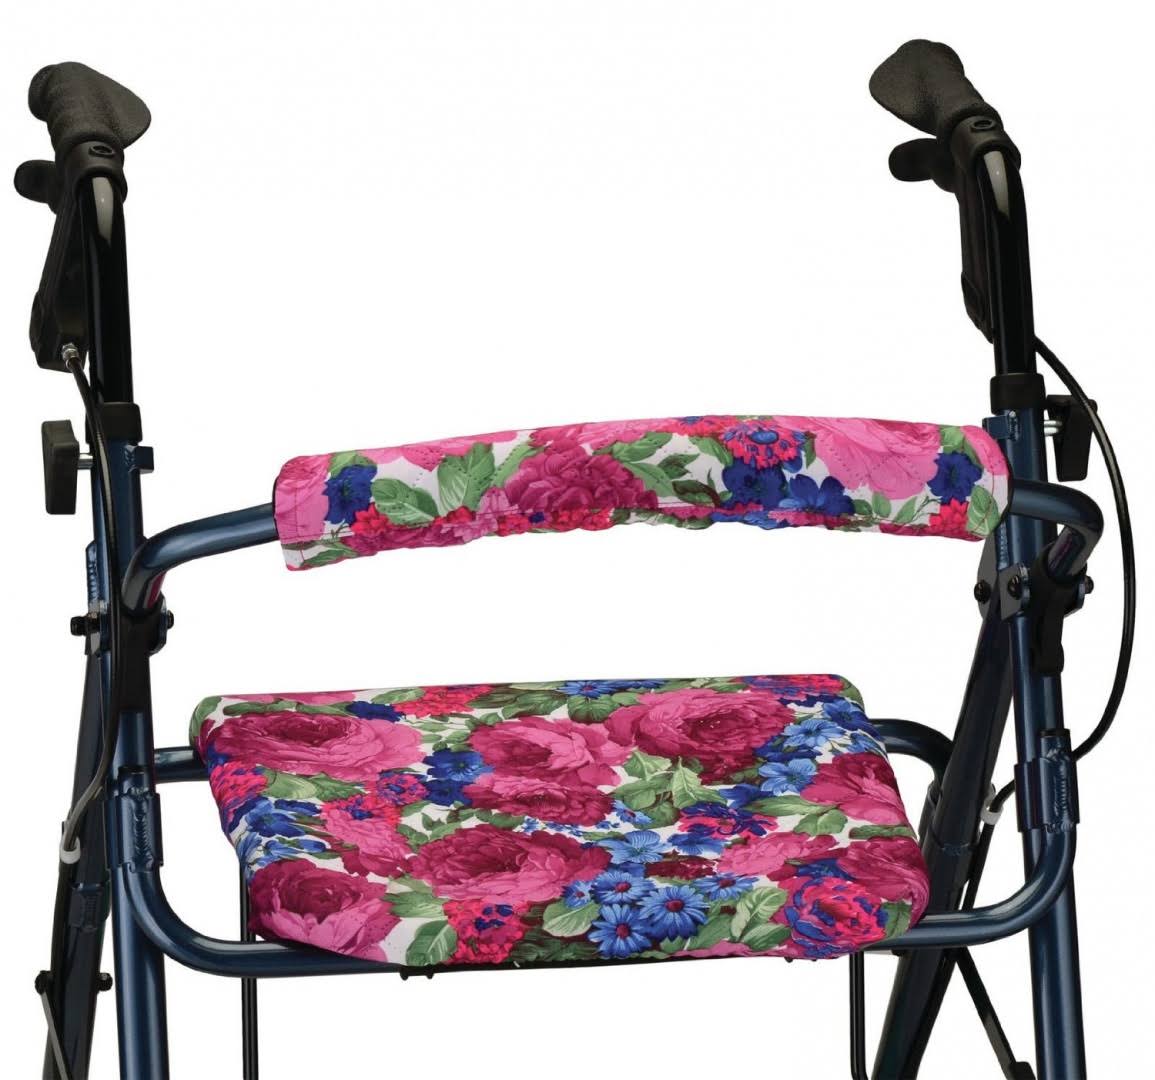 Nova Medical Products Rolling Walker Seat and Back Cover - English Garden